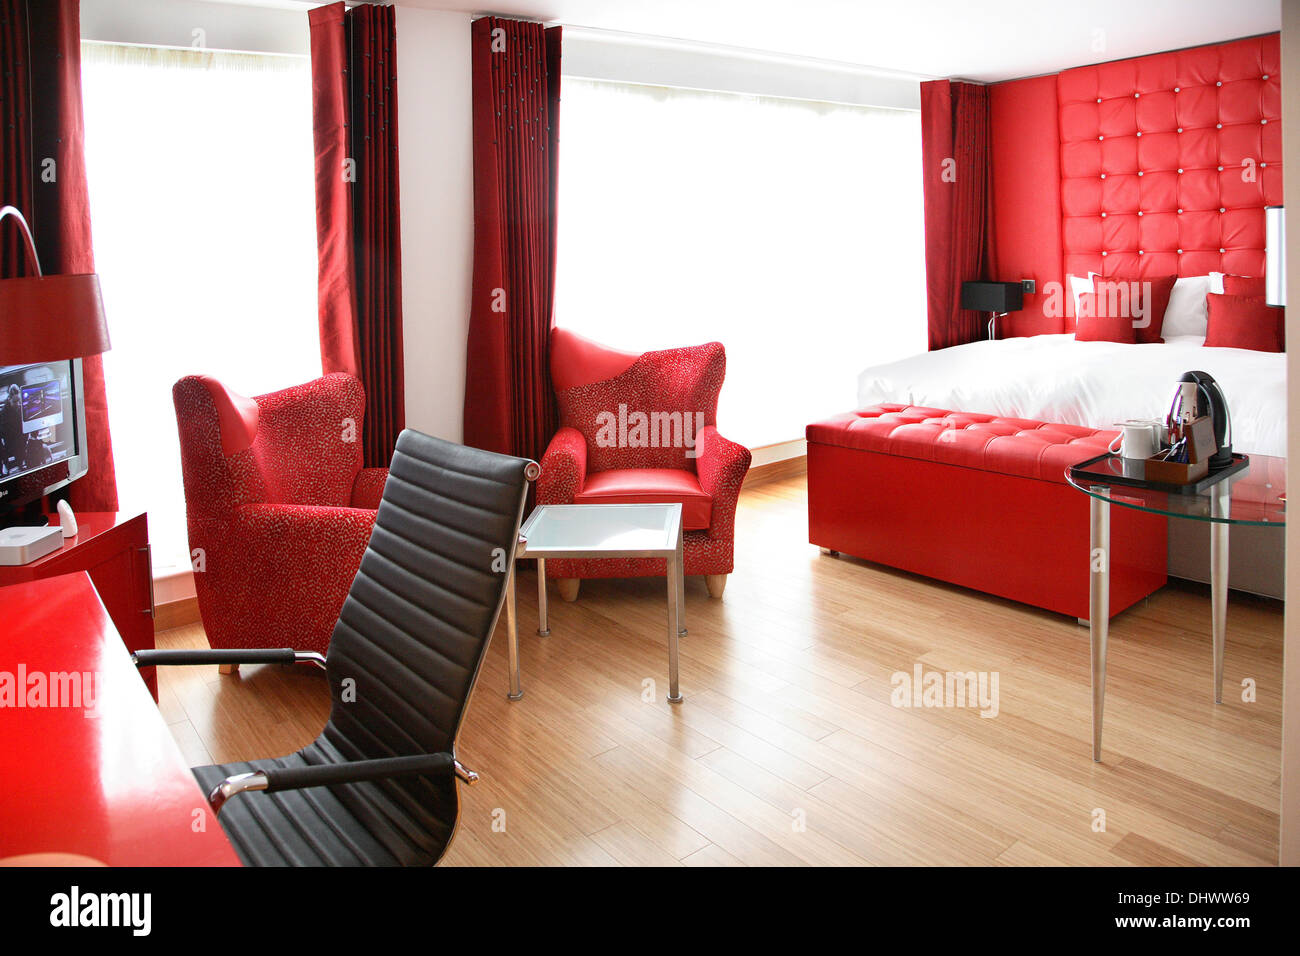 A modern hotel room featuring a distinctive bright red colour scheme Stock Photo